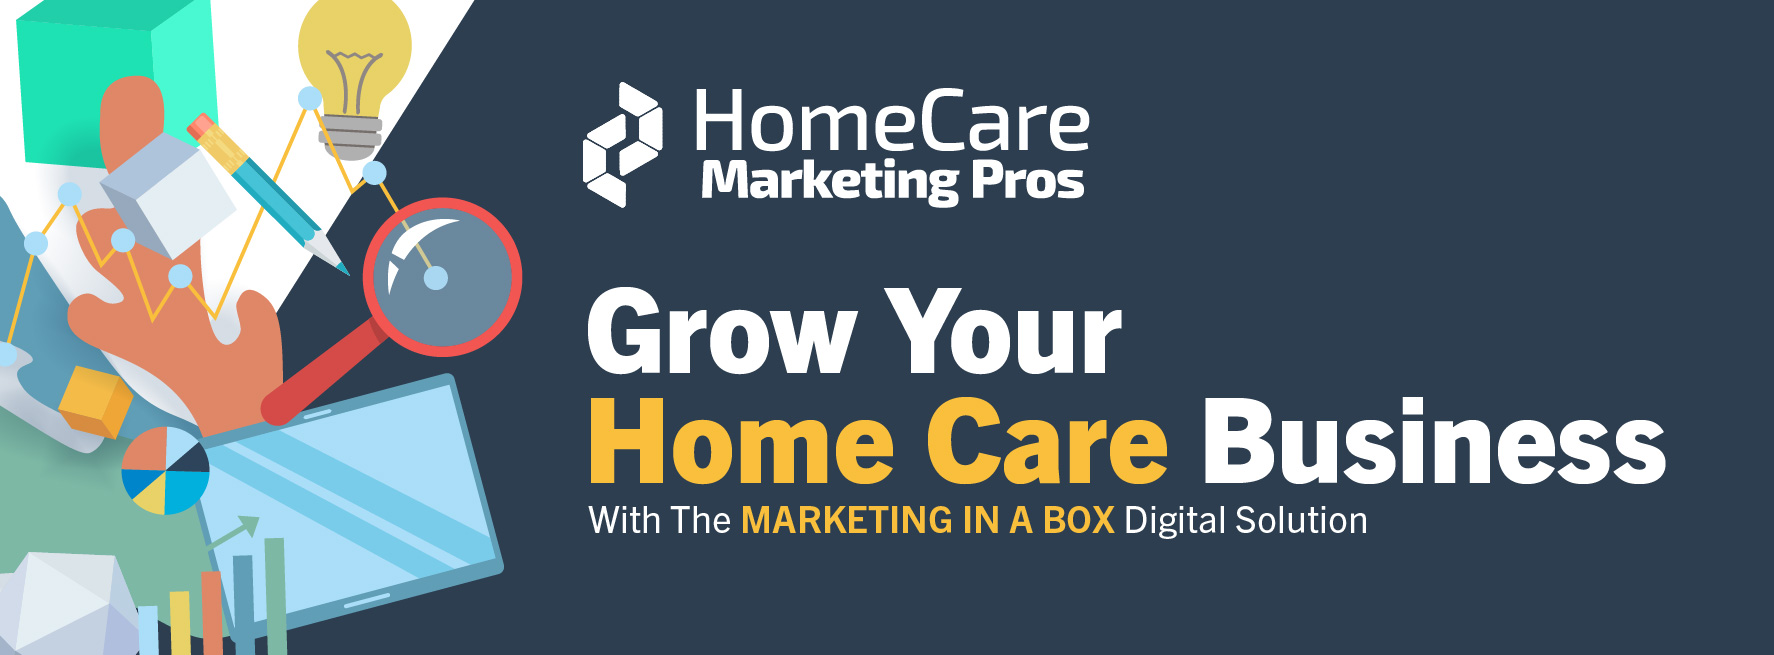 Providentia Marketing LLC Changes Its Name to Home Care Marketing Pros, Adds New Products